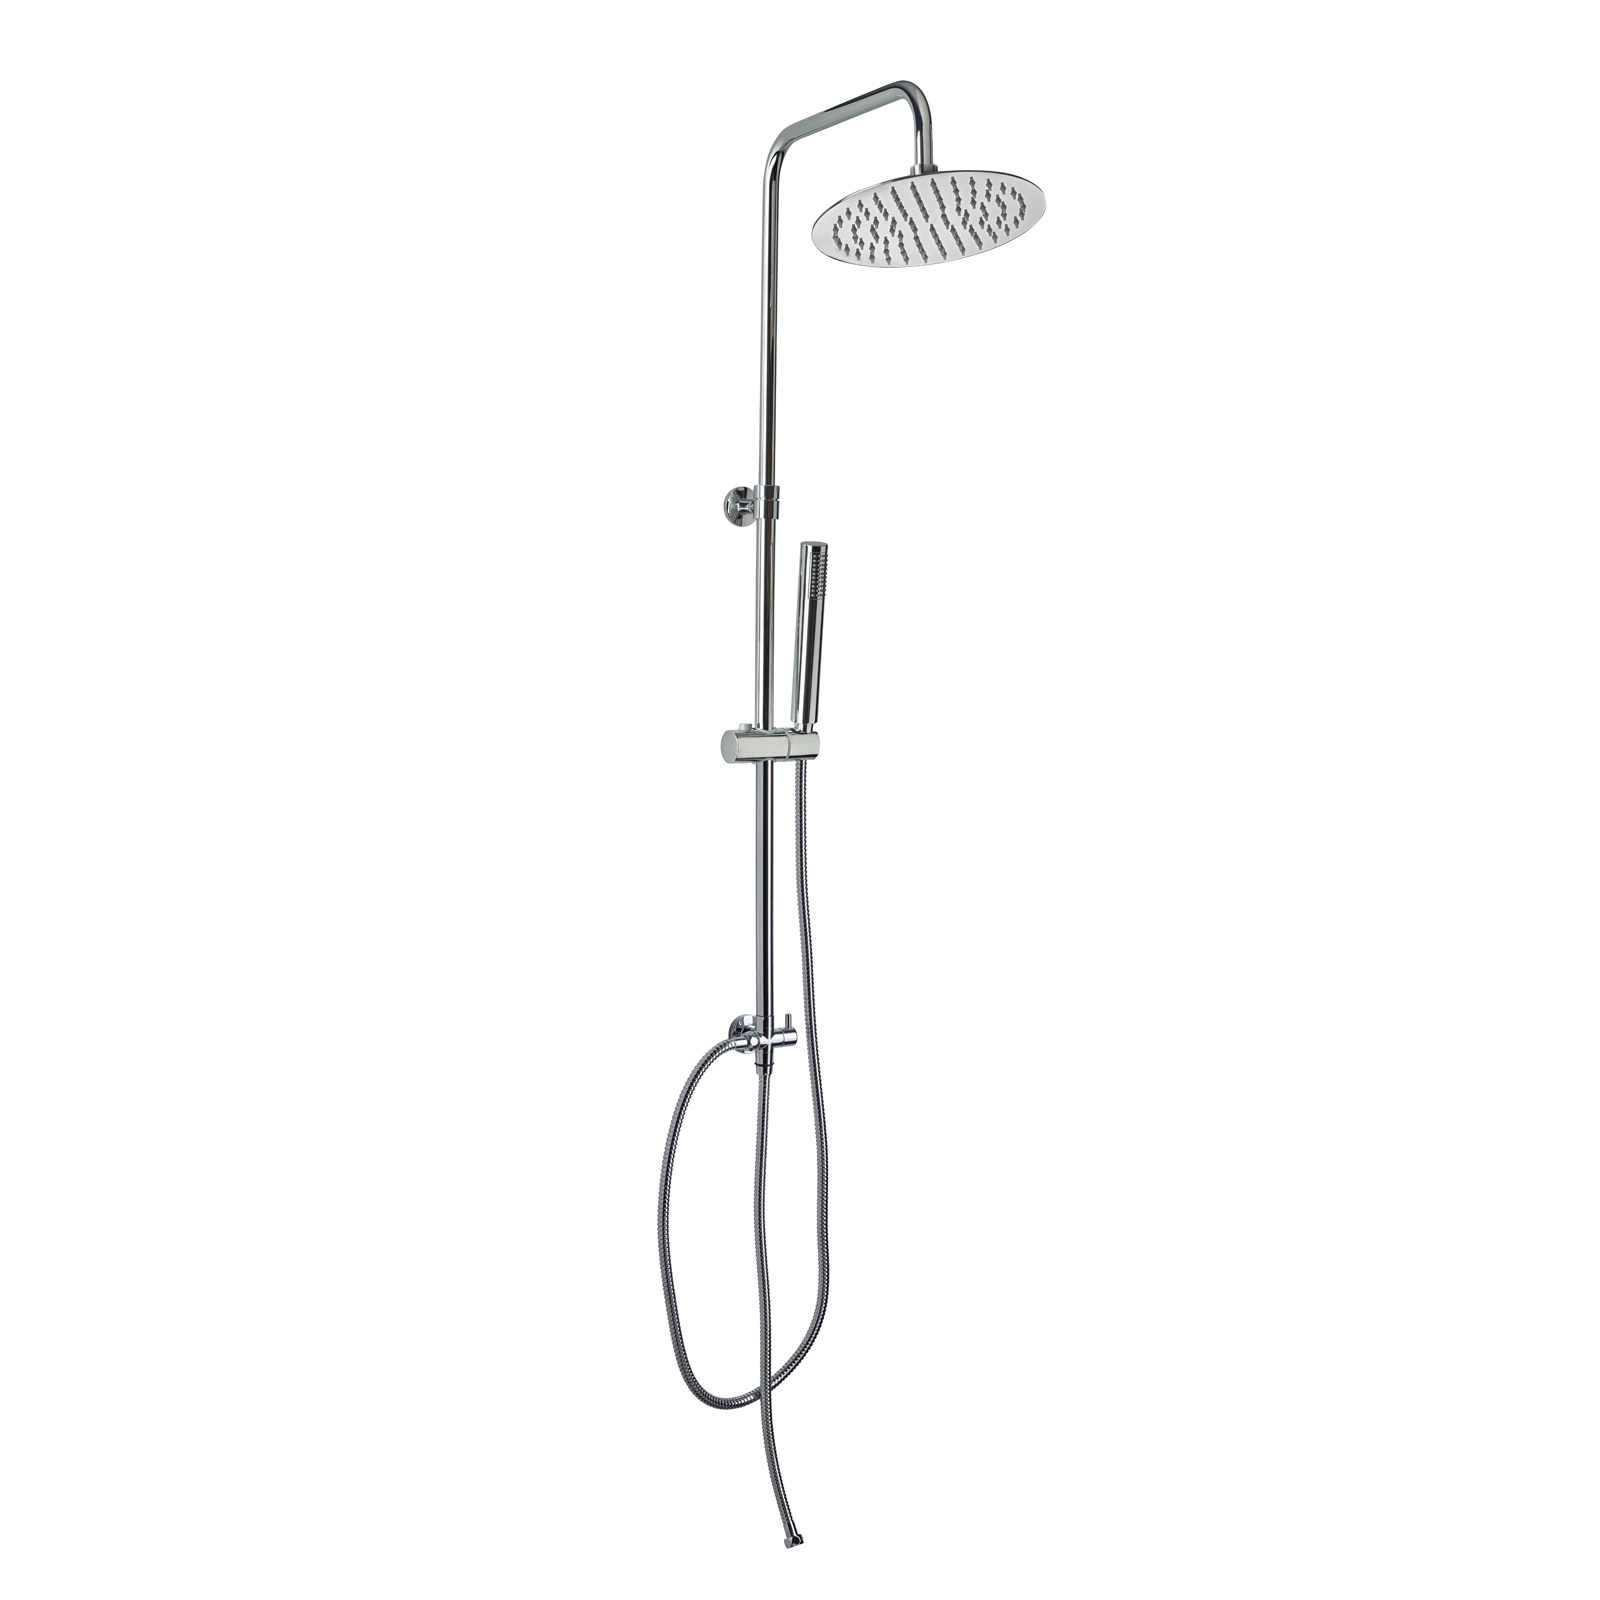 Telescopic shower column with automatic diverter and wall bracket, with shower rose and self cleaning hand shower